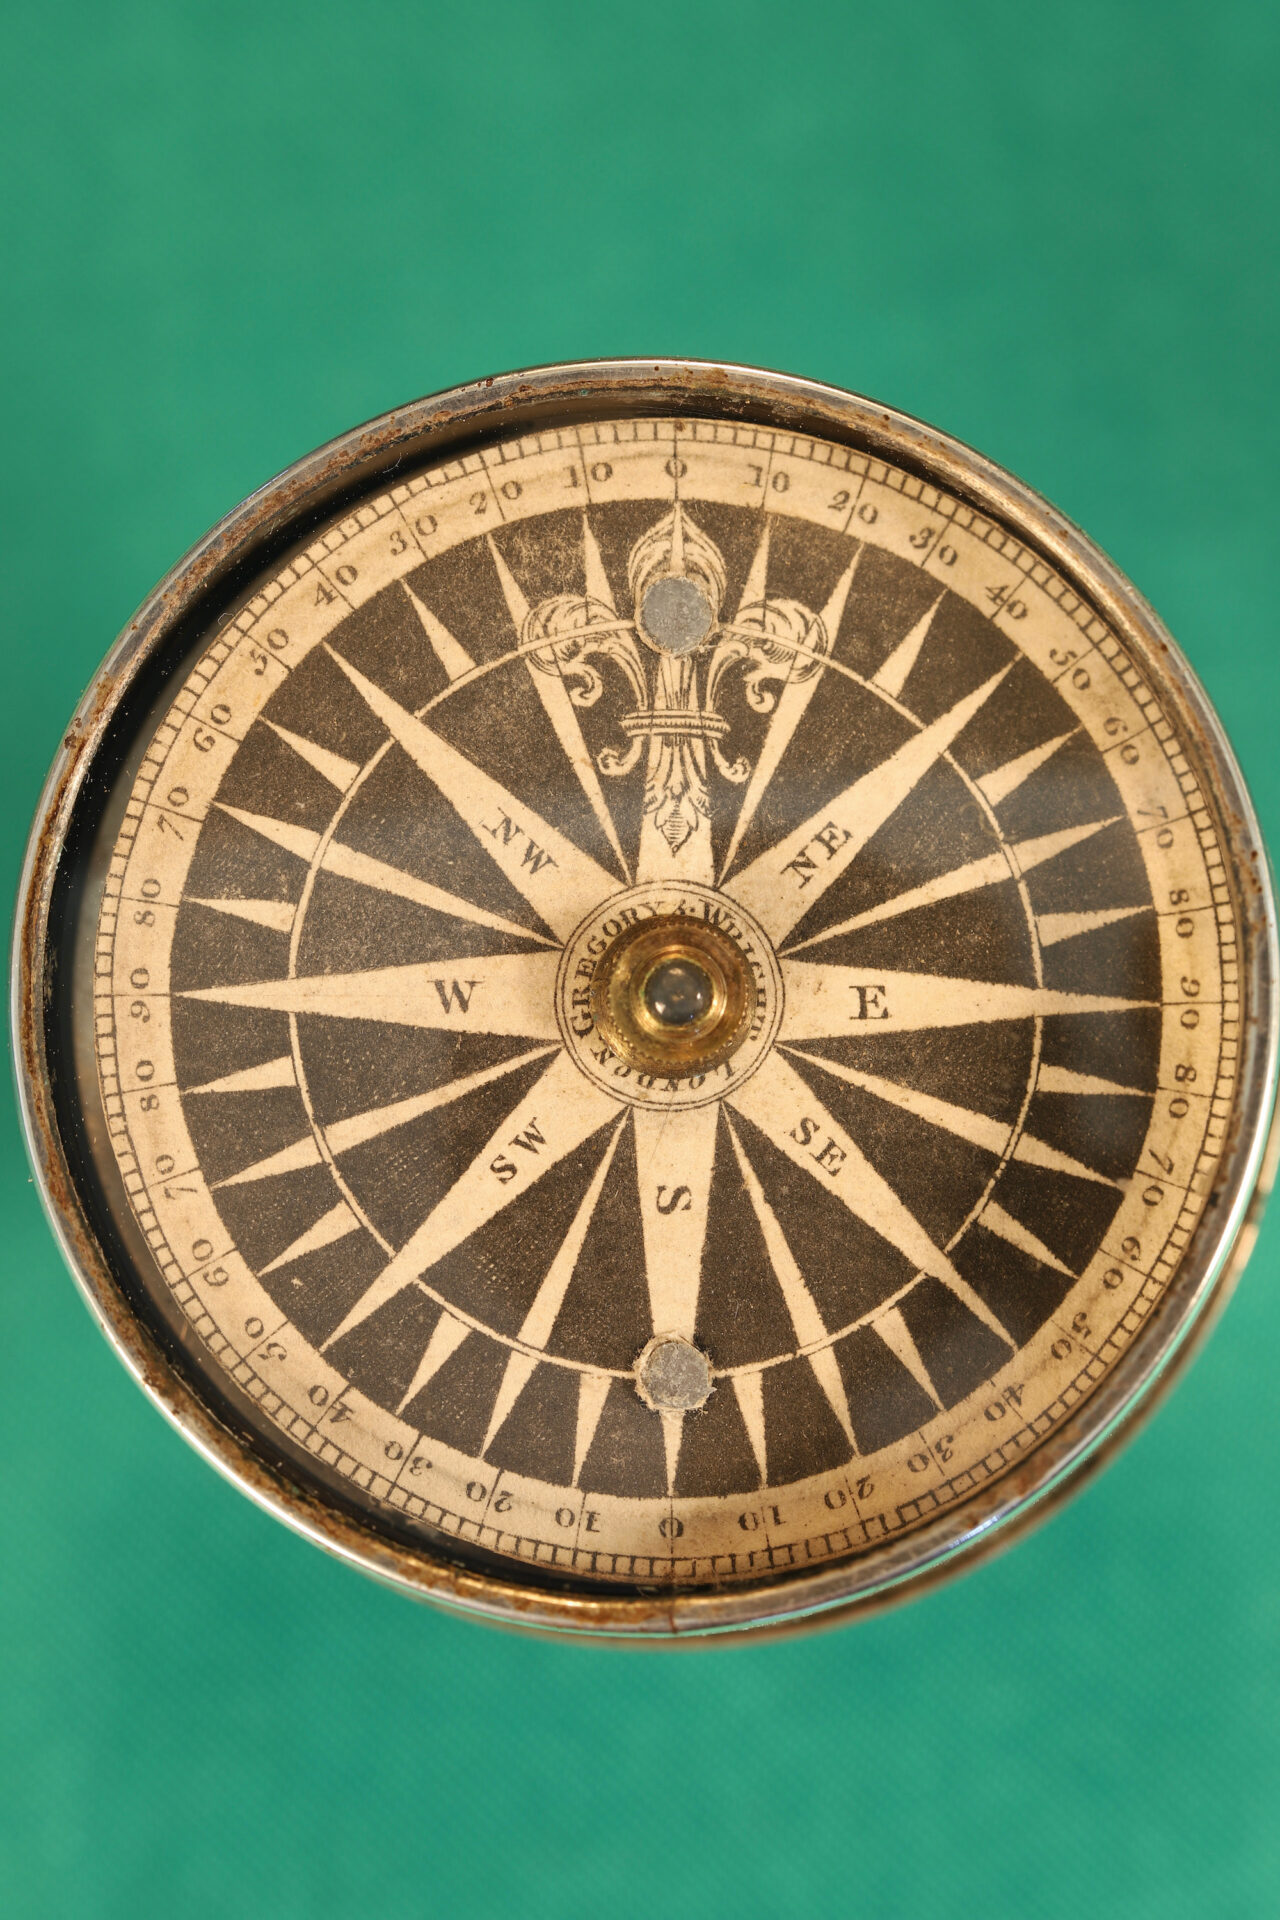 Image of dial of Gregory & Wright Gimballed Mariners Compass c1785